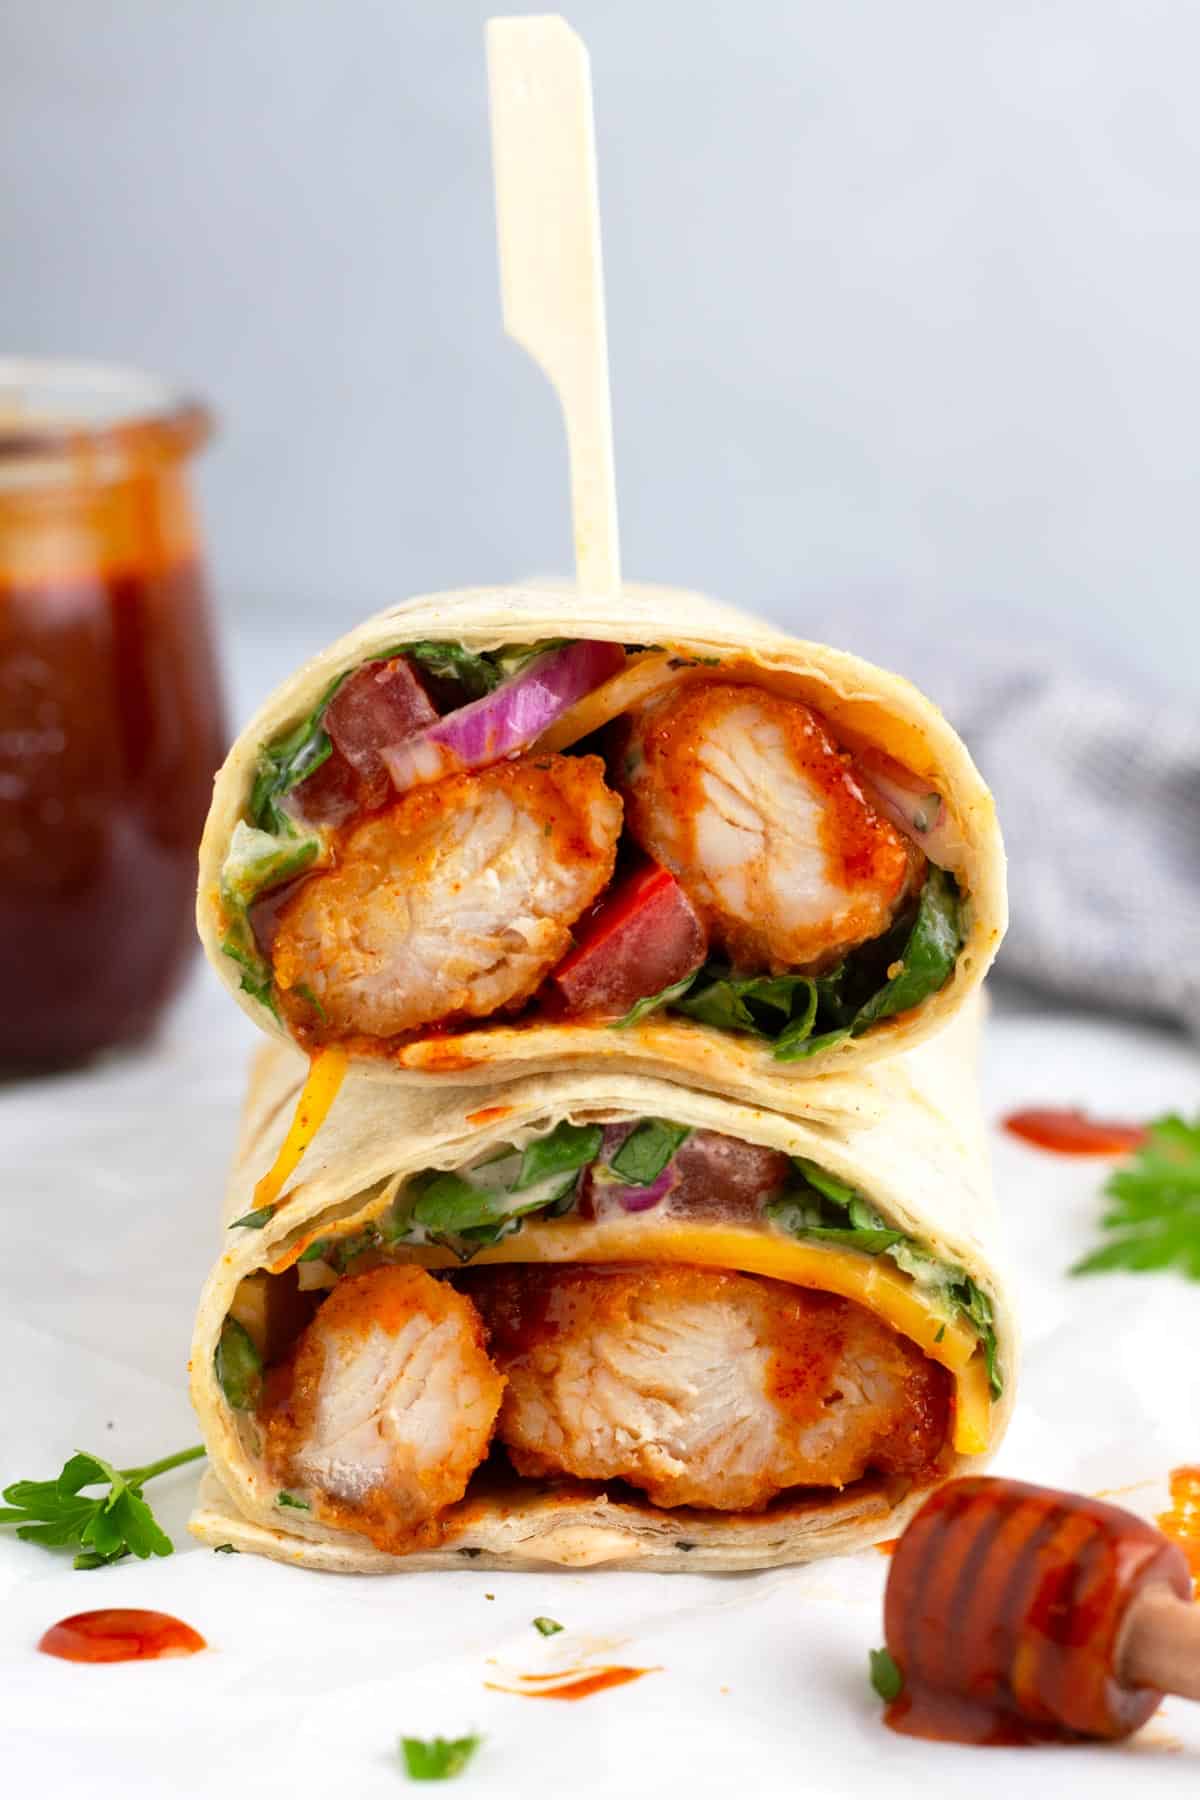 Chicken in a tortilla wrapped up with heat infused honey sauce dipped stick in the foreground.